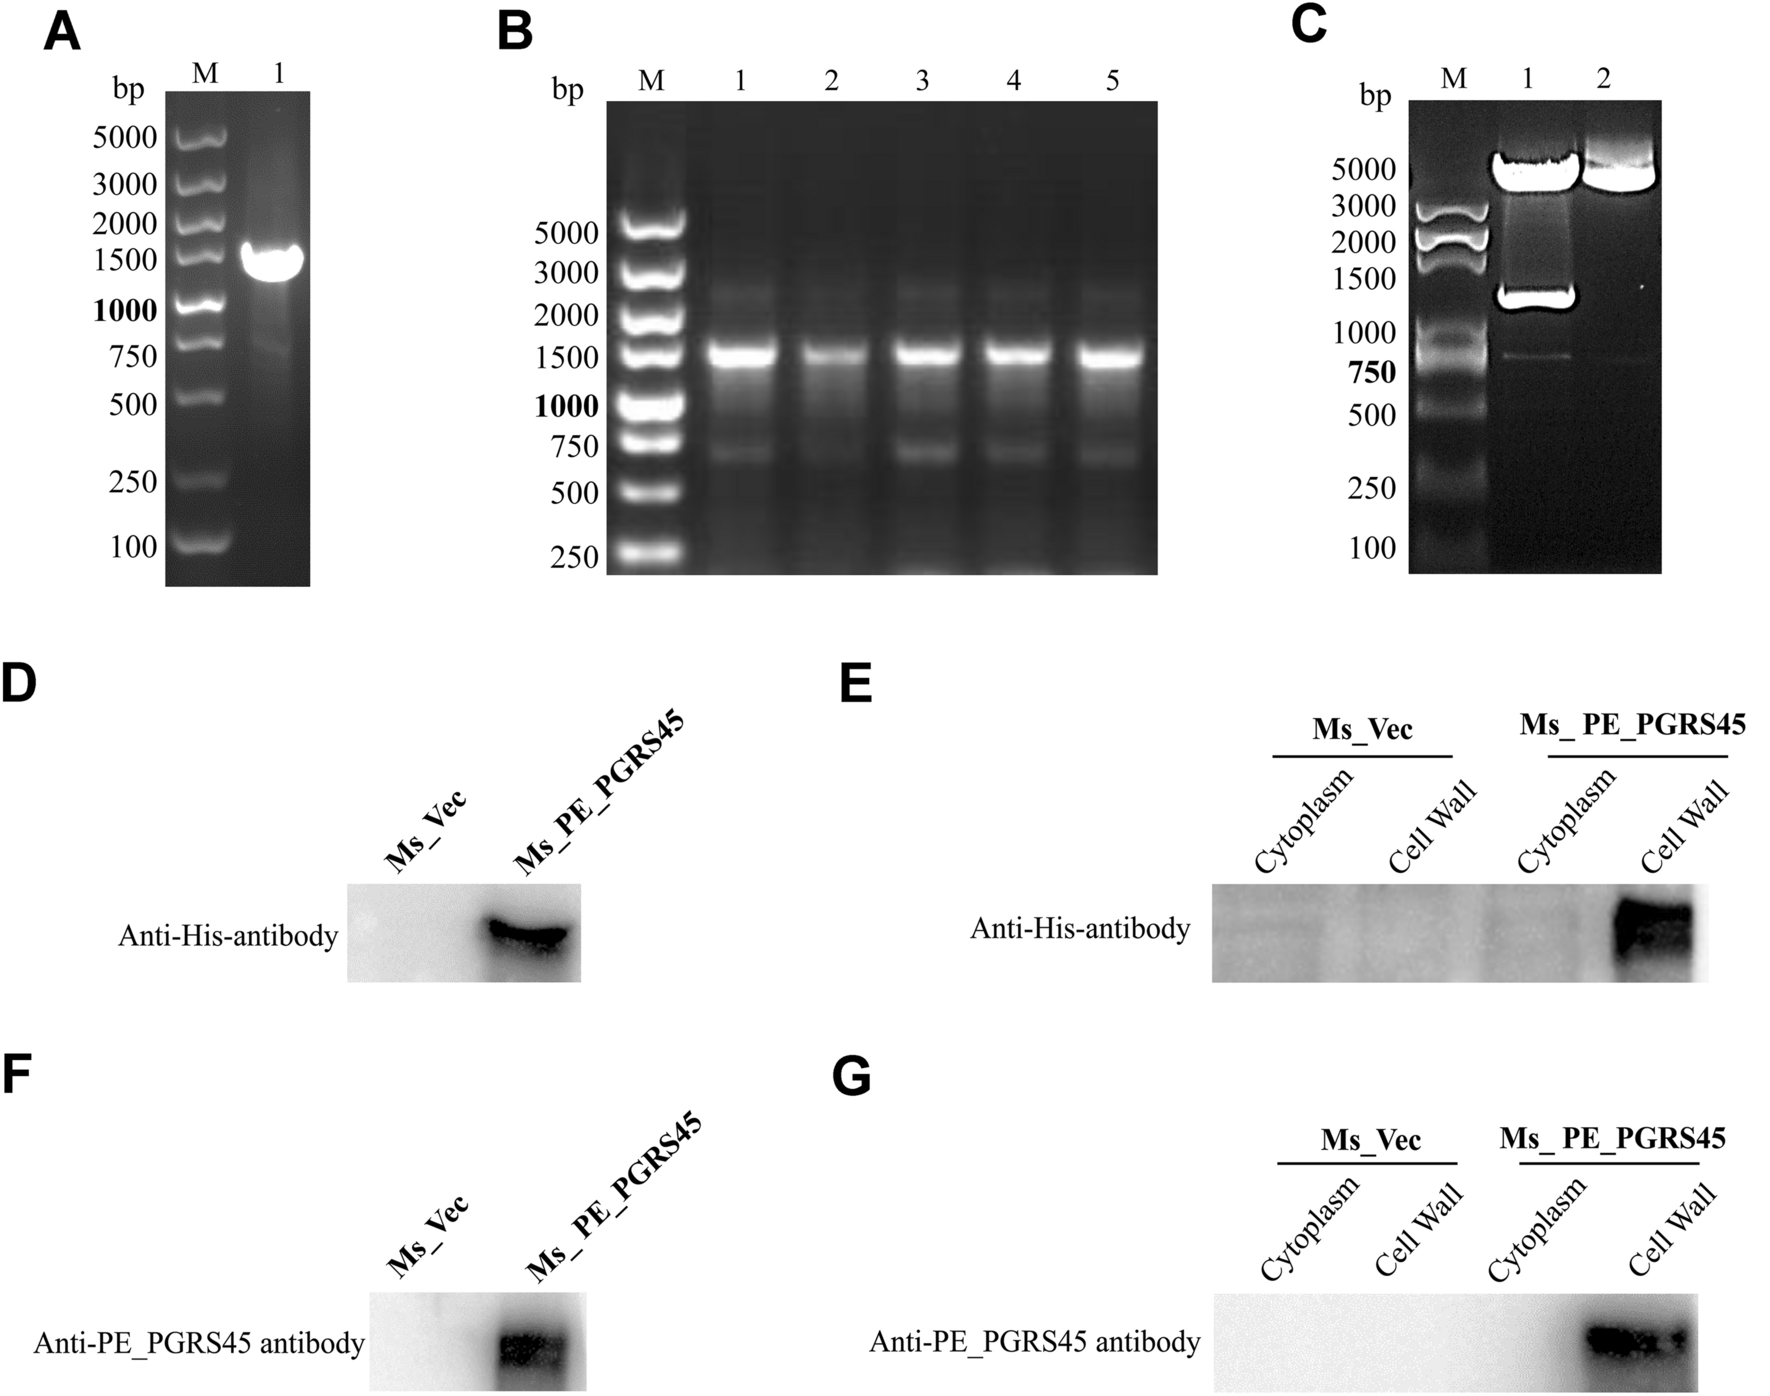 Mycobacterium tuberculosis PE_PGRS45 (Rv2615c) Promotes Recombinant Mycobacteria Intracellular Survival via Regulation of Innate Immunity, and Inhibition of Cell Apoptosis